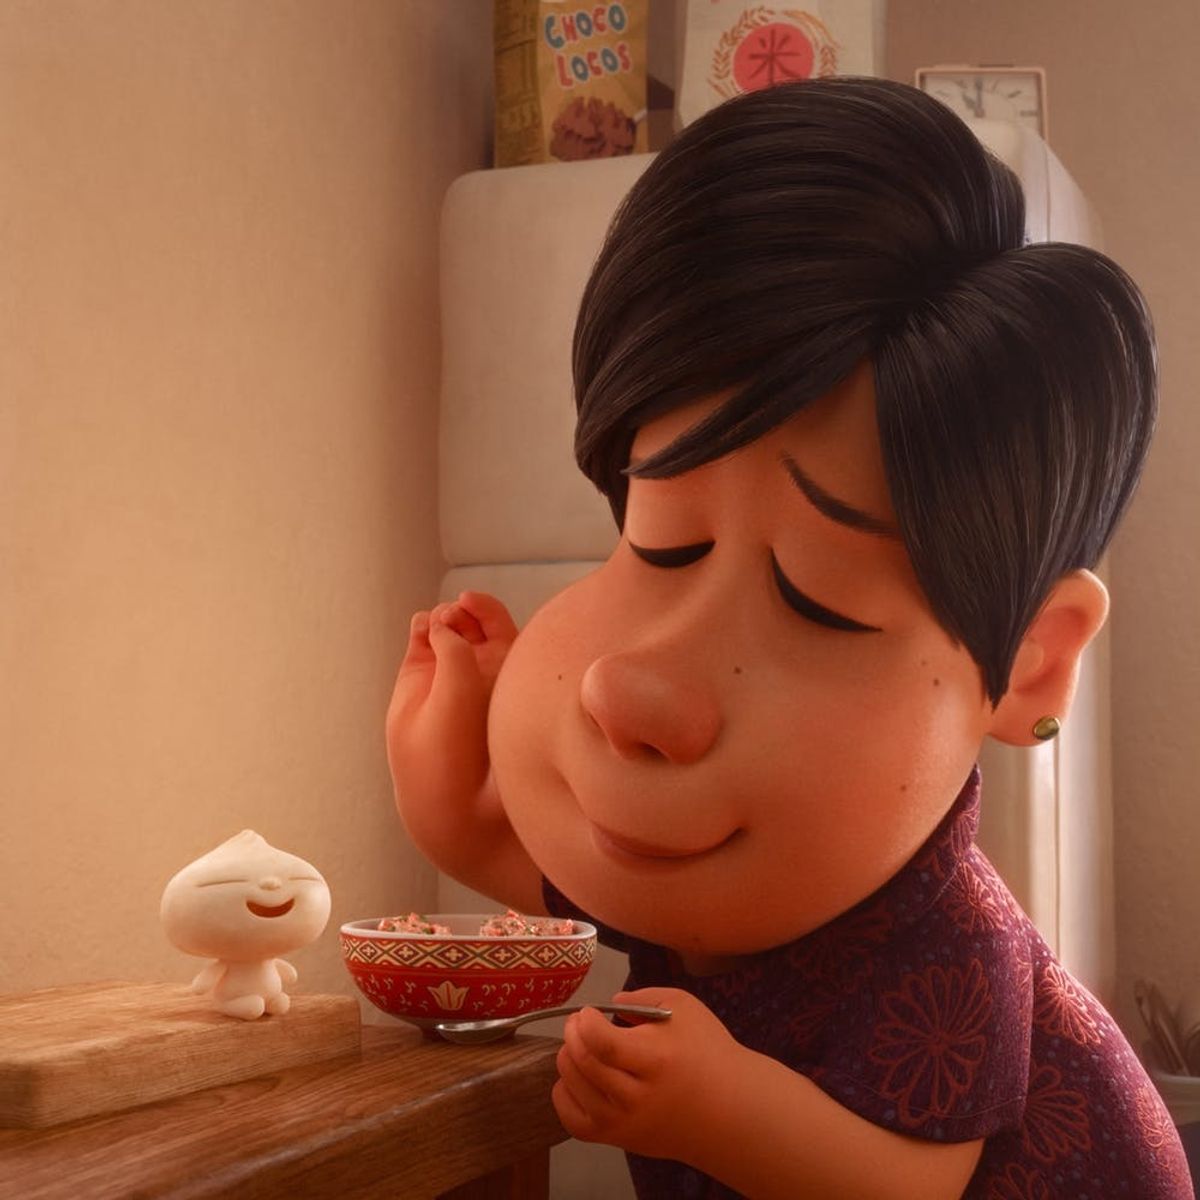 Why the 2019 Oscar Win for Pixar’s ‘Bao’ Has Viewers Unapologetically Shook